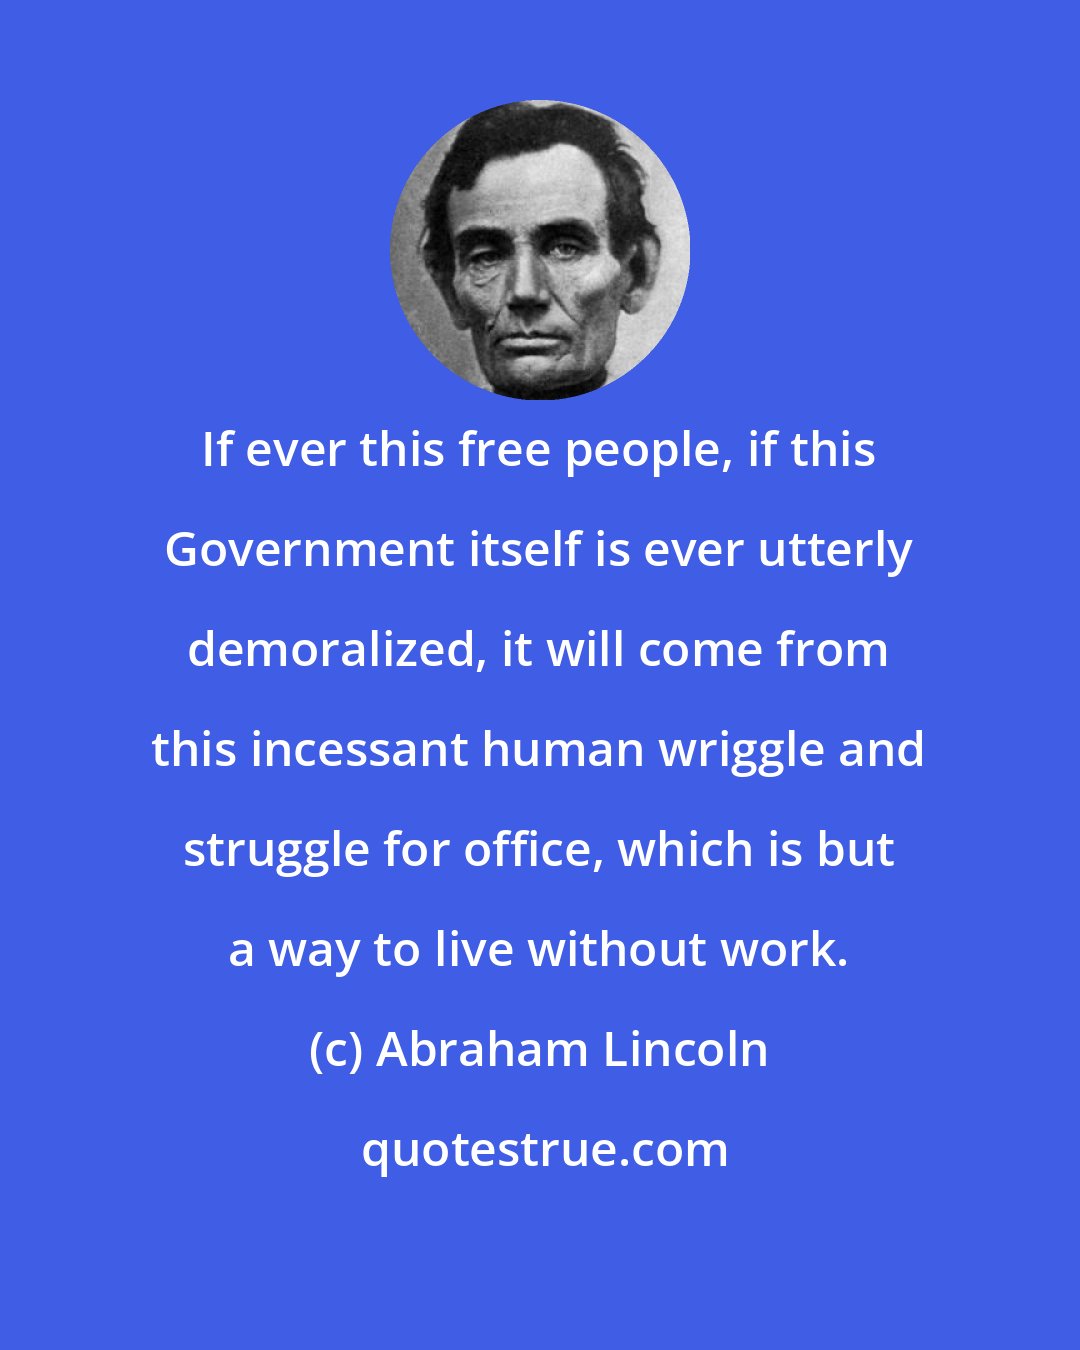 Abraham Lincoln: If ever this free people, if this Government itself is ever utterly demoralized, it will come from this incessant human wriggle and struggle for office, which is but a way to live without work.